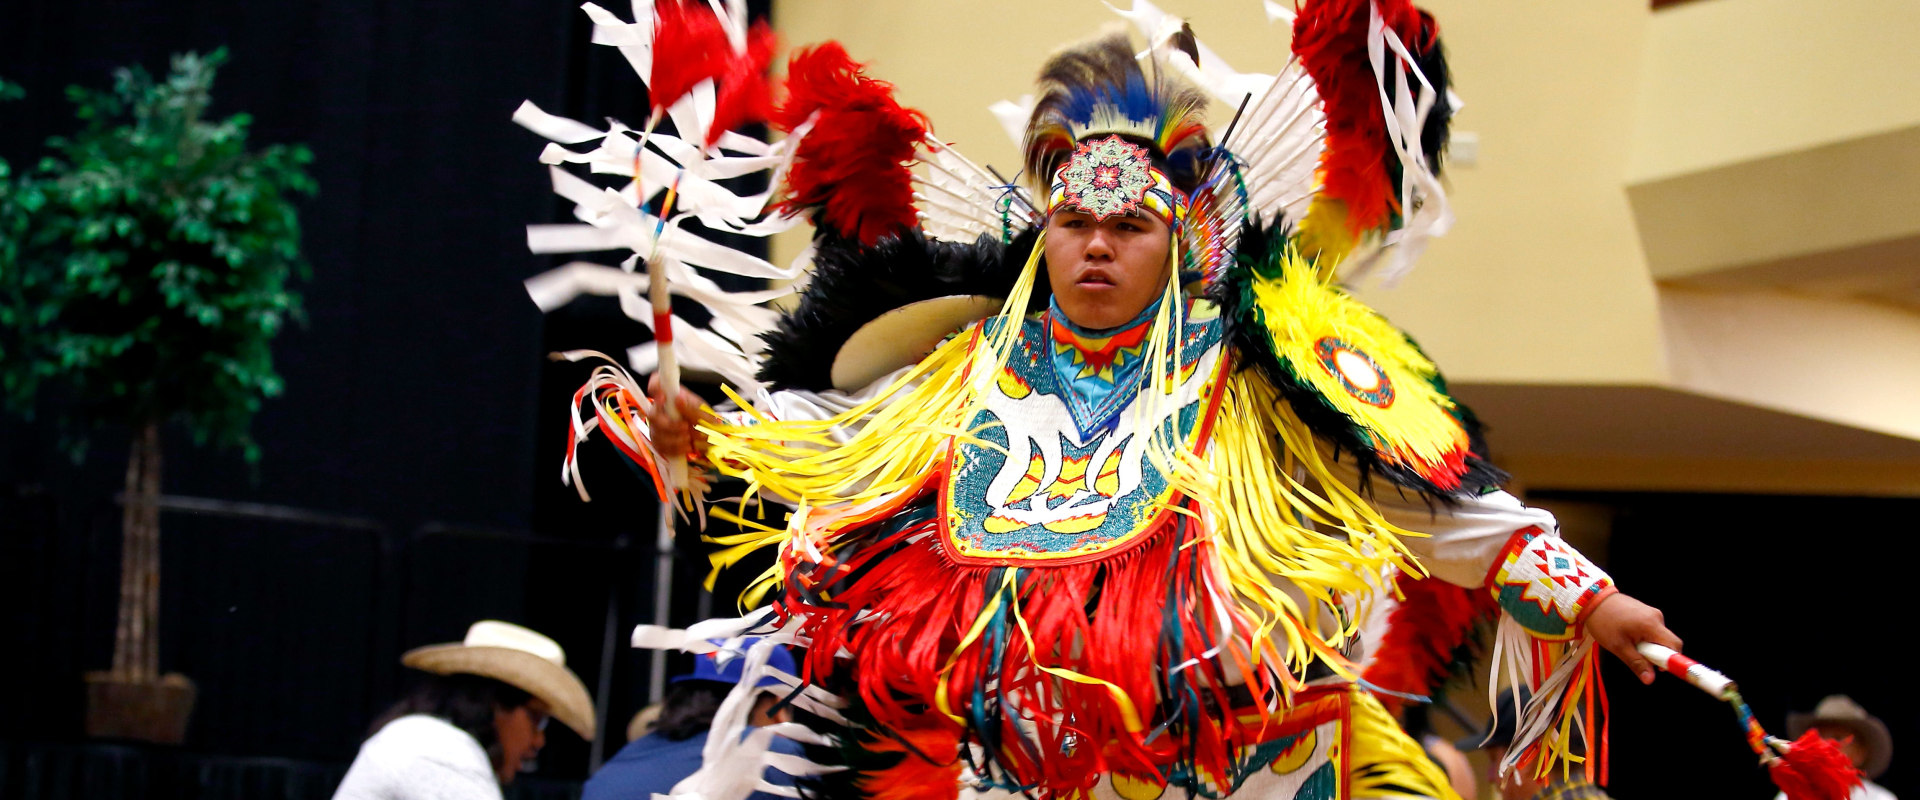 Celebrating Native American Heritage at the Red Earth Festival